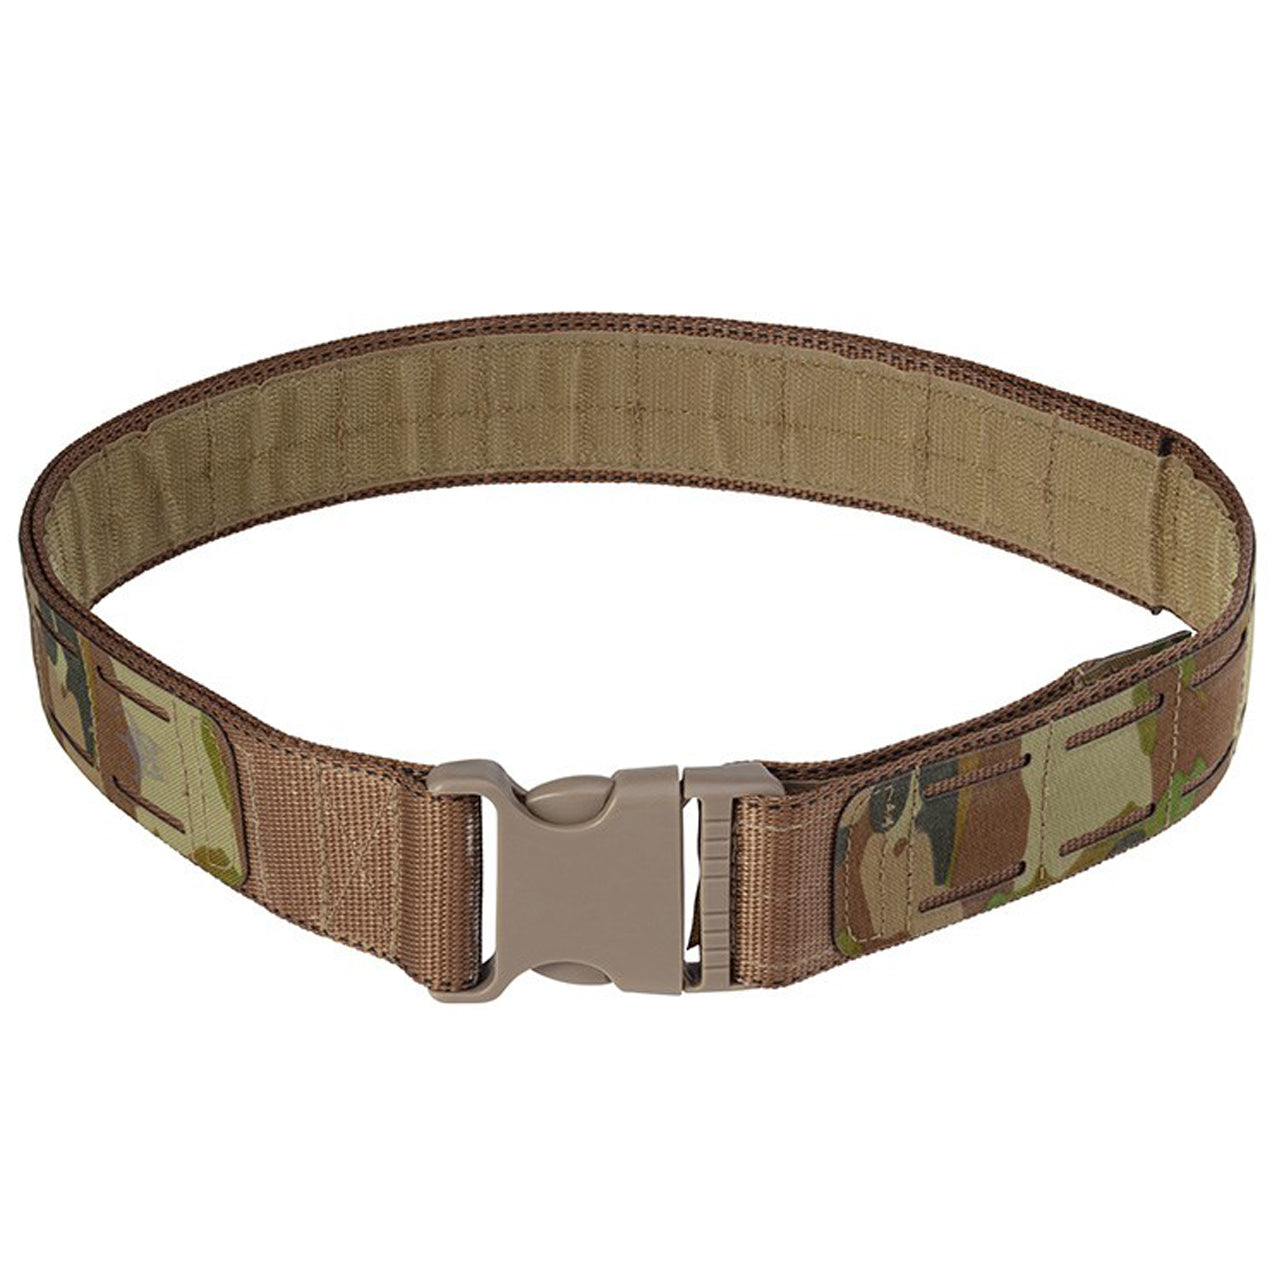 Designed for close-quarter operations, this robust Low Profile Operator Belt is designed to keep up with the toughest missions. Crafted from highly durable 38mm TY13 resin-coated webbing, the belt features a Mil-Spec 45mm side release buckle and is available in various sizes. www.moralepatches.com.au